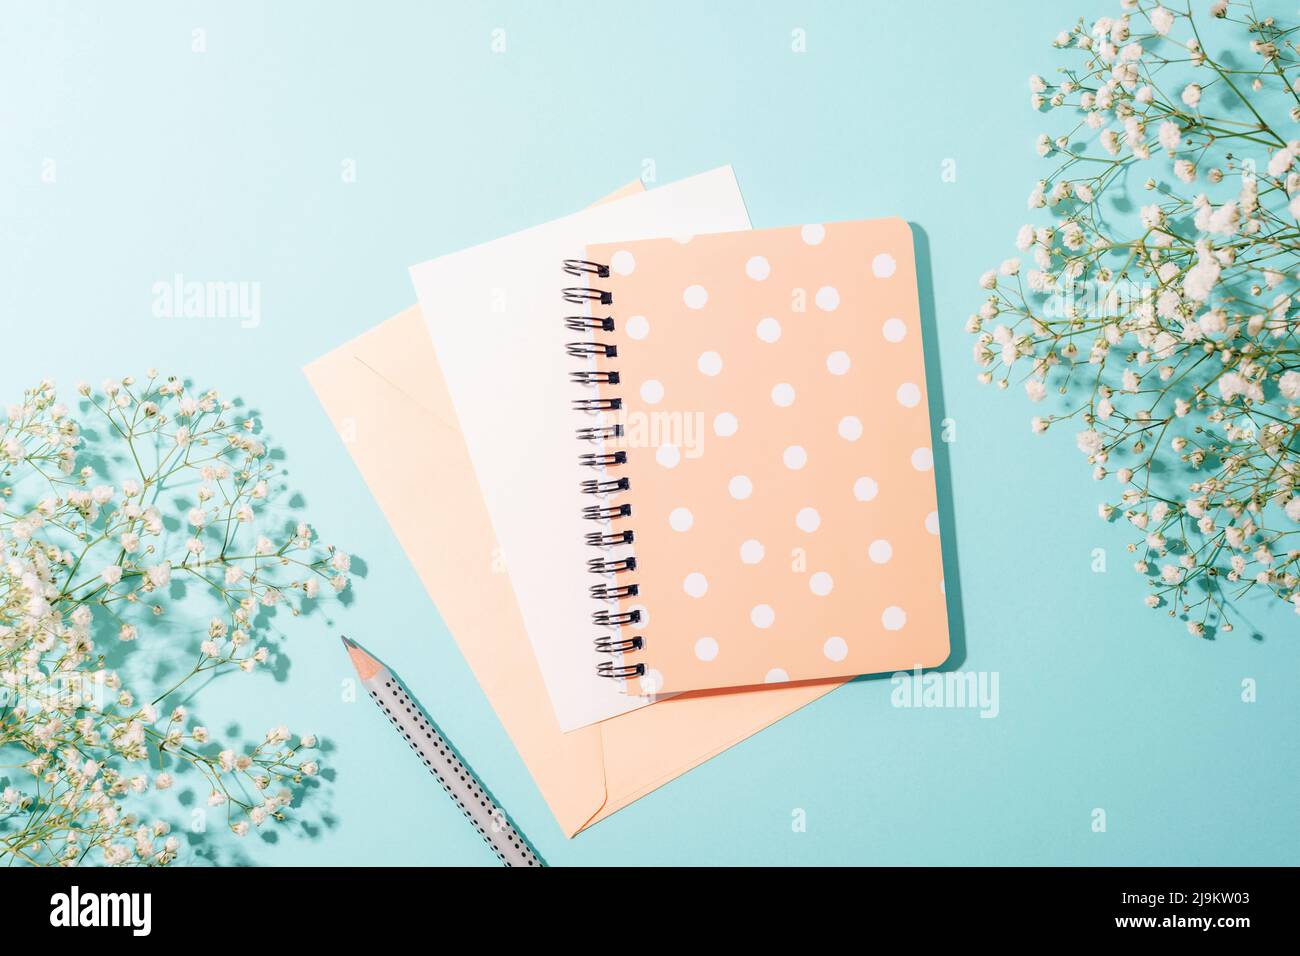 Notepad and envelope with blank sheet, pencil on blue background with gypsophila flowers in sunlight. Top view, flat lay. Stock Photo